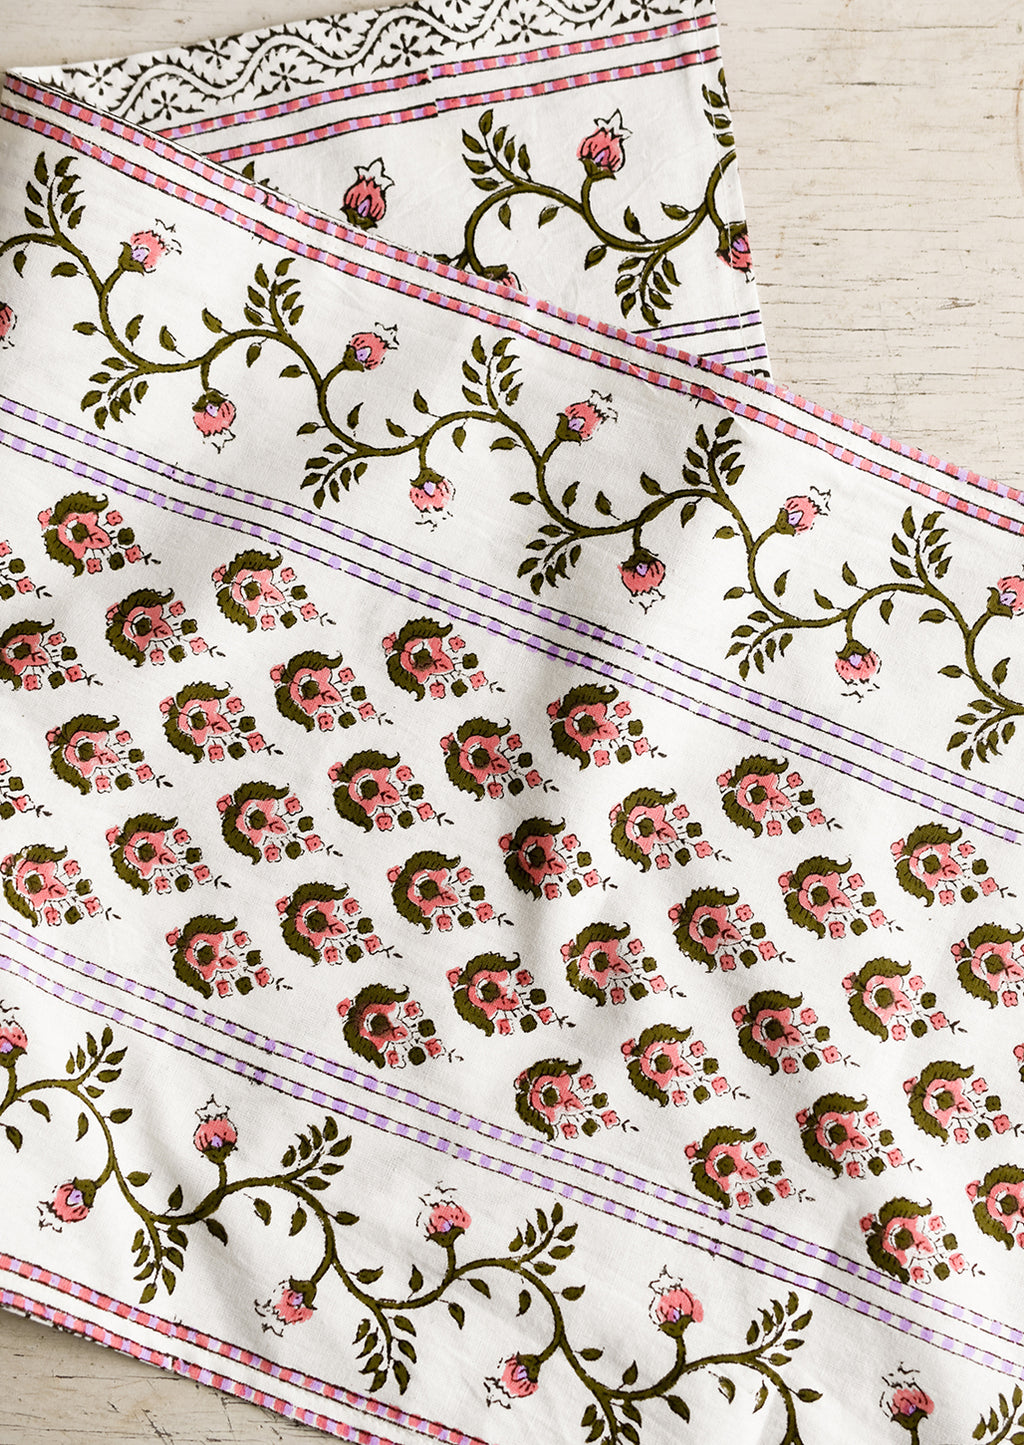 1: A block printed white table runner with pink, green and lavender floral print.